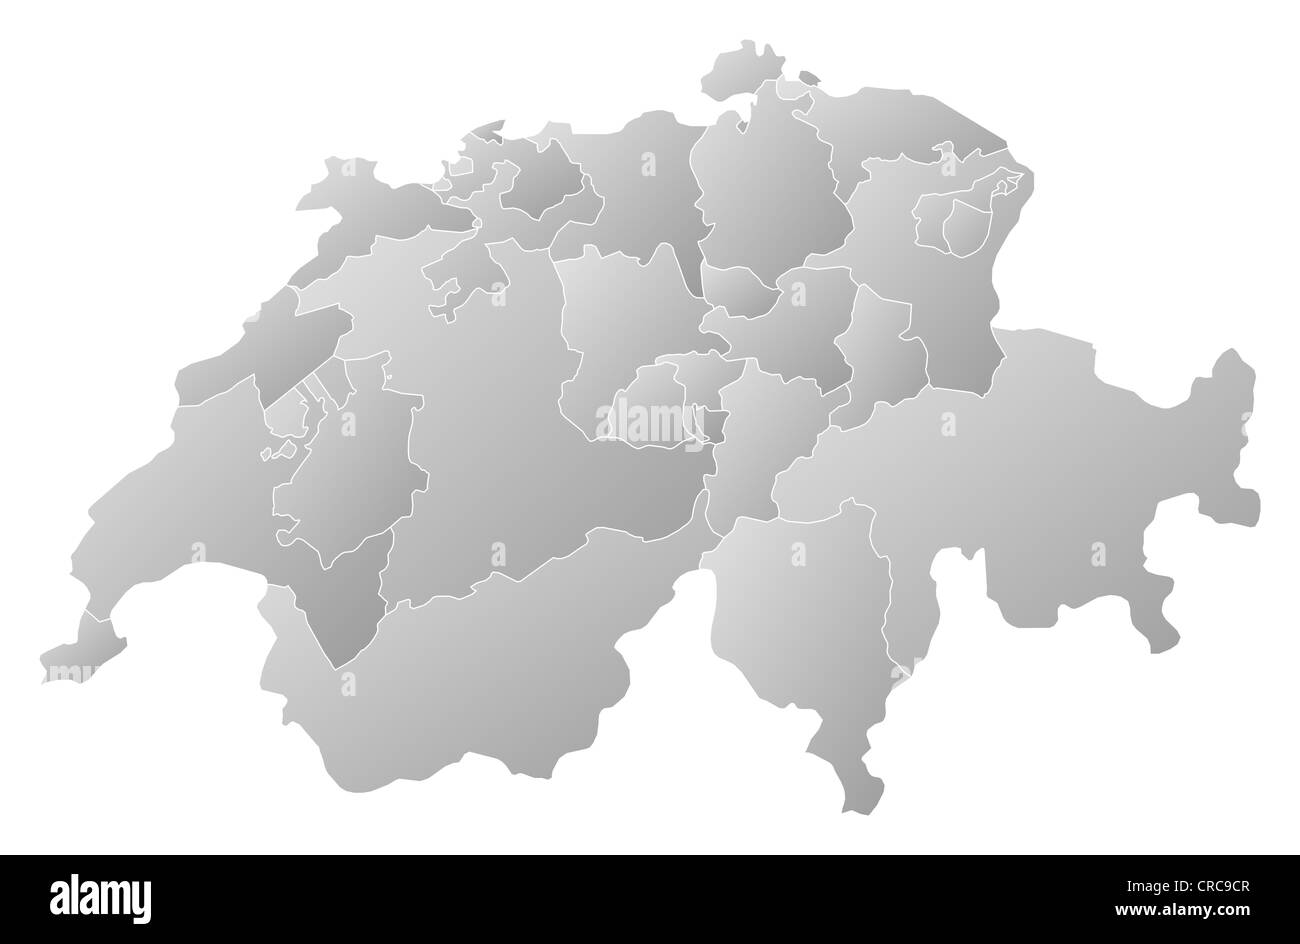 Political map of Swizerland with the several cantons. Stock Photo